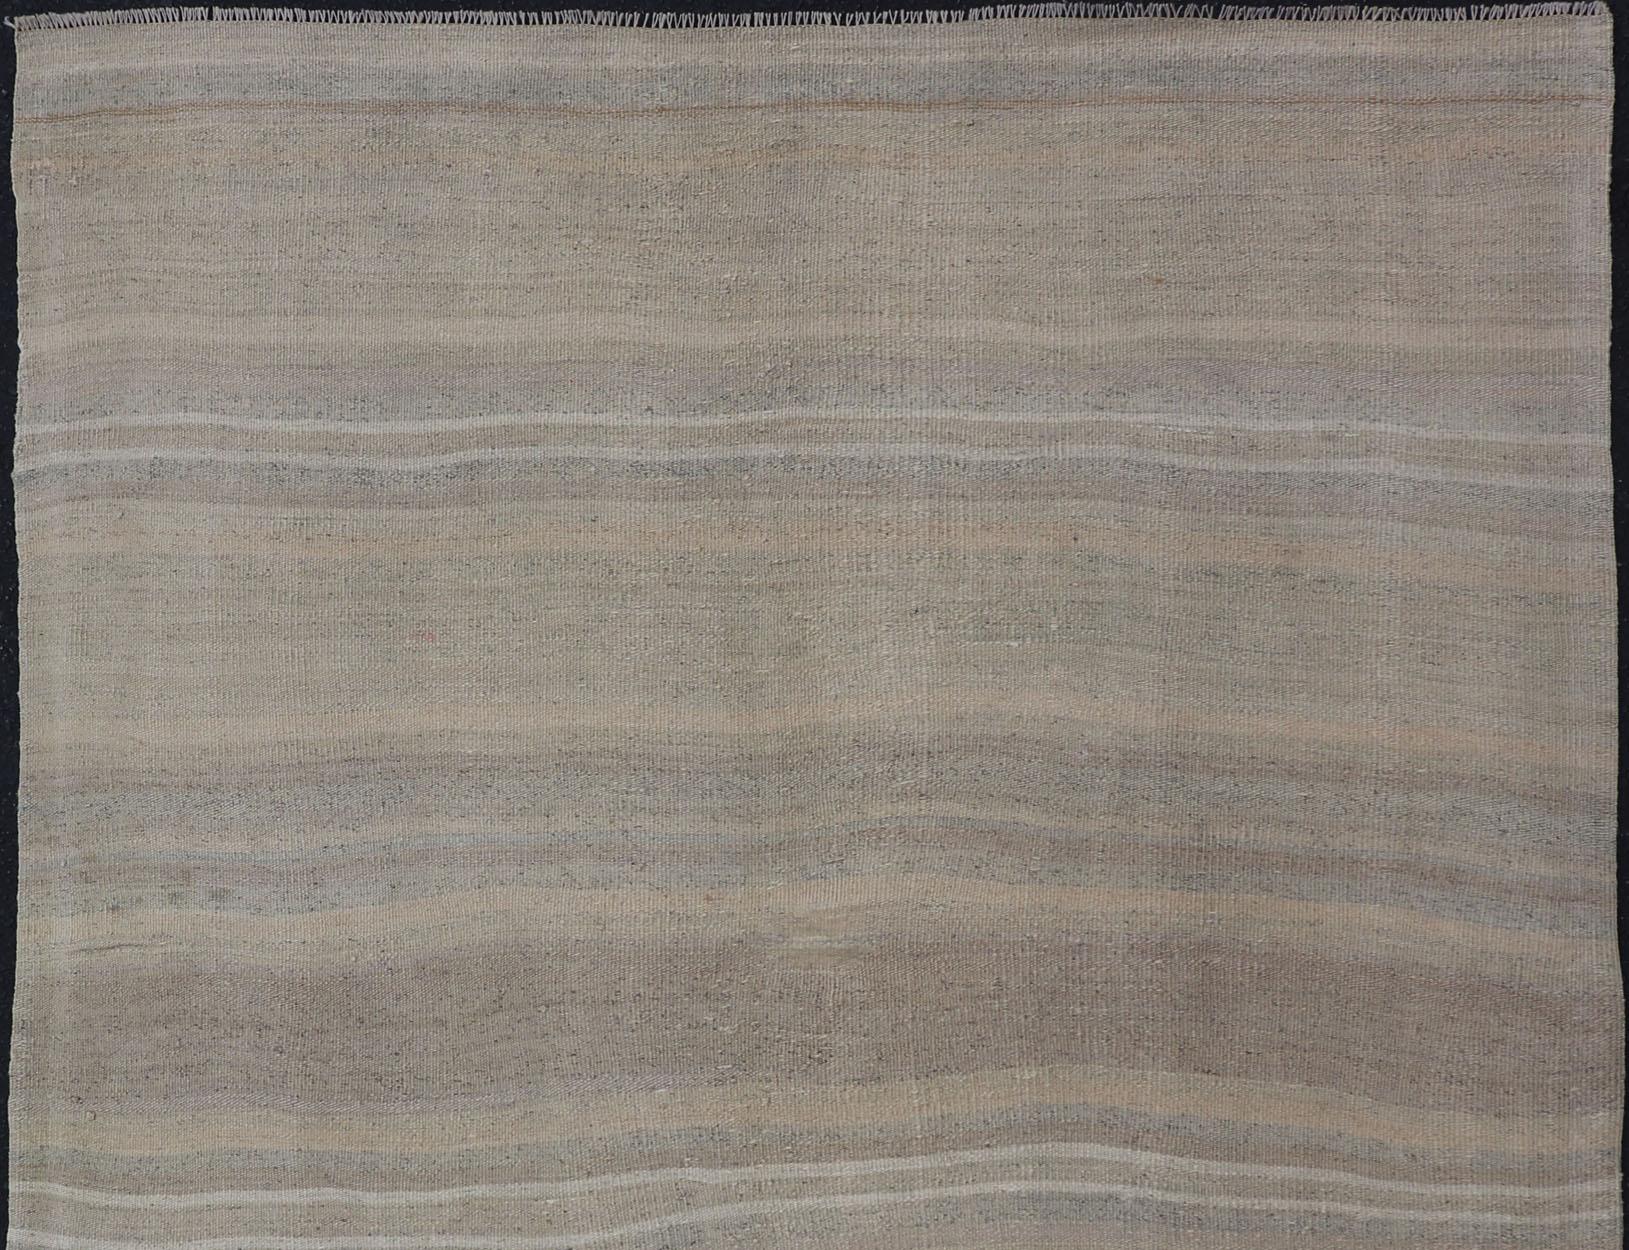 Vintage Turkish Kilim with Stripes in Gray, Tan, Taupe, and Cream For Sale 2